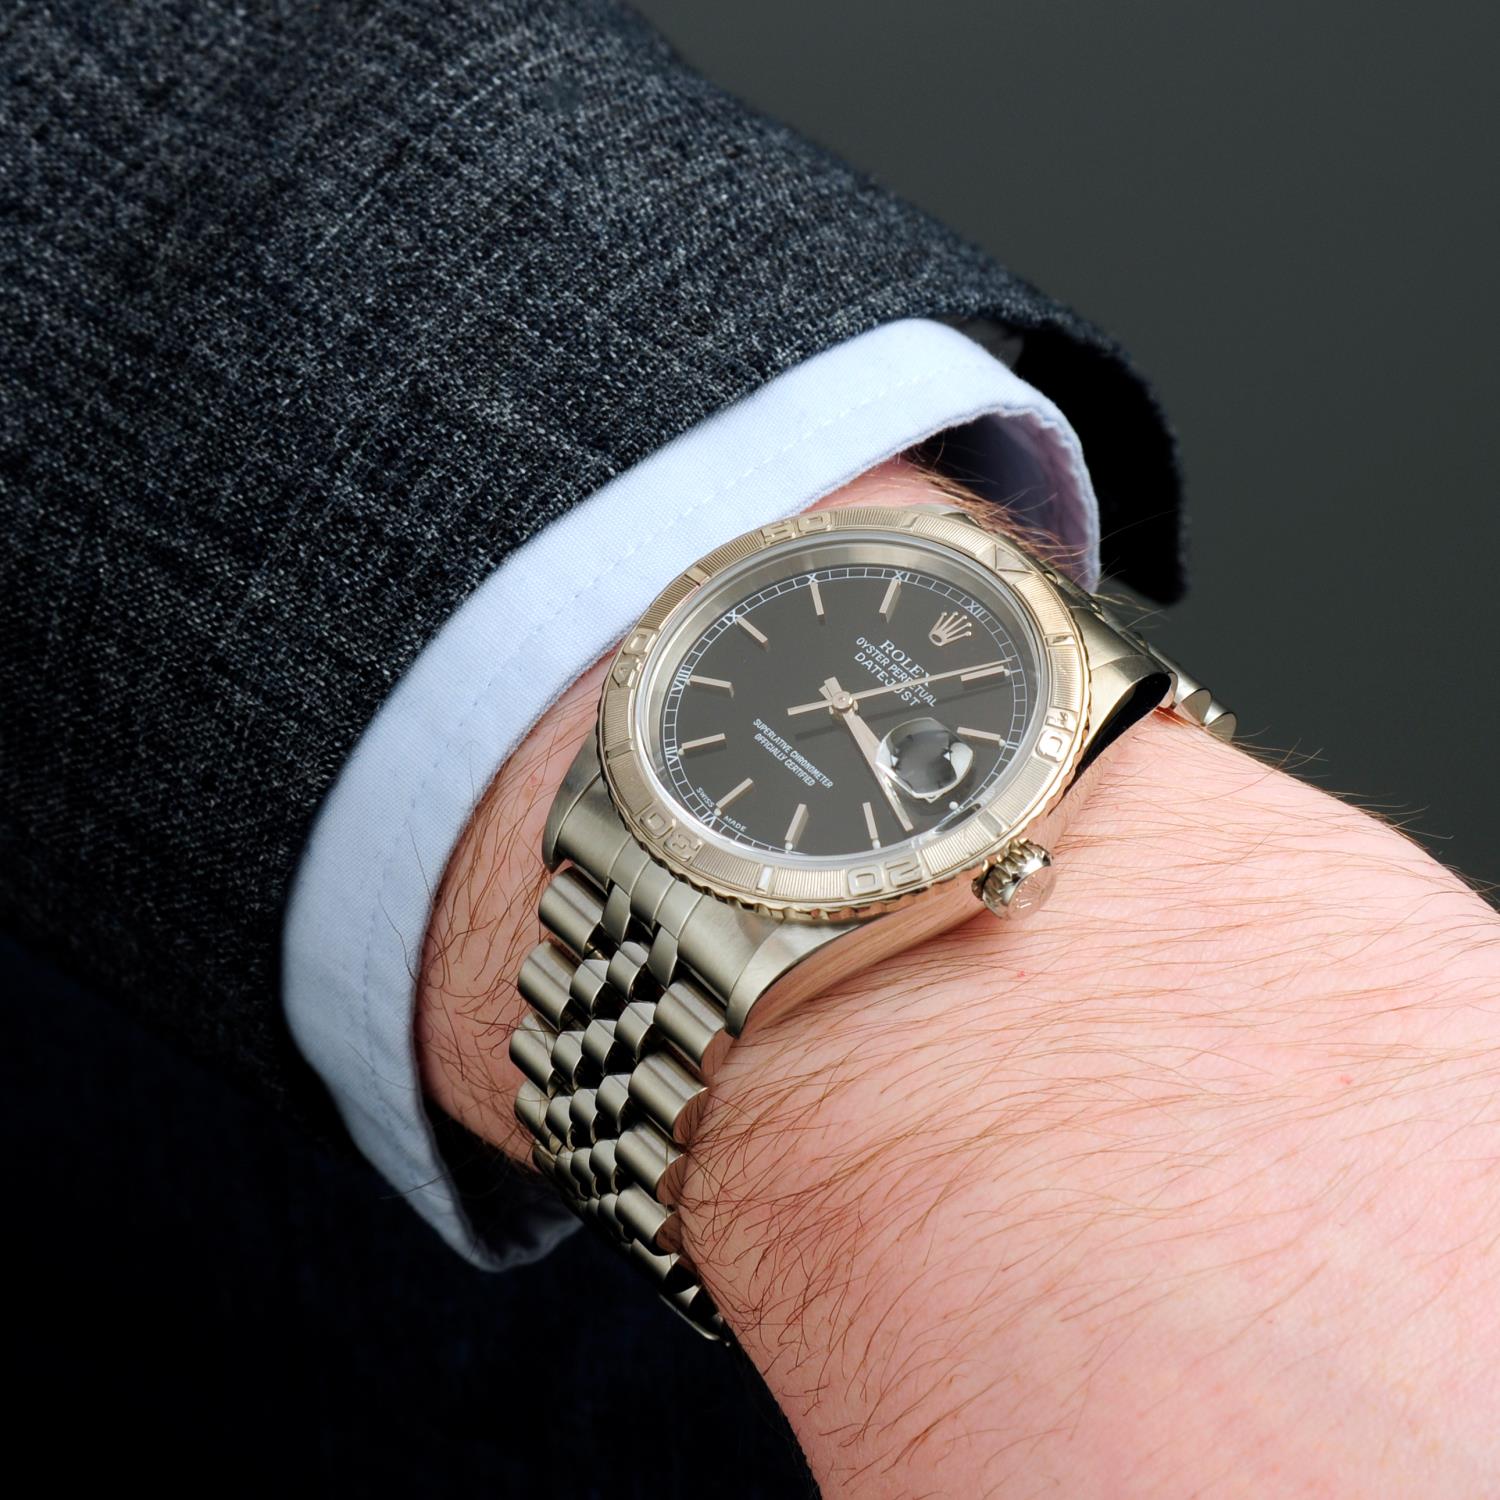 ROLEX - an Oyster Perpetual Datejust 'Turn-O-Graph' bracelet watch. - Image 3 of 6